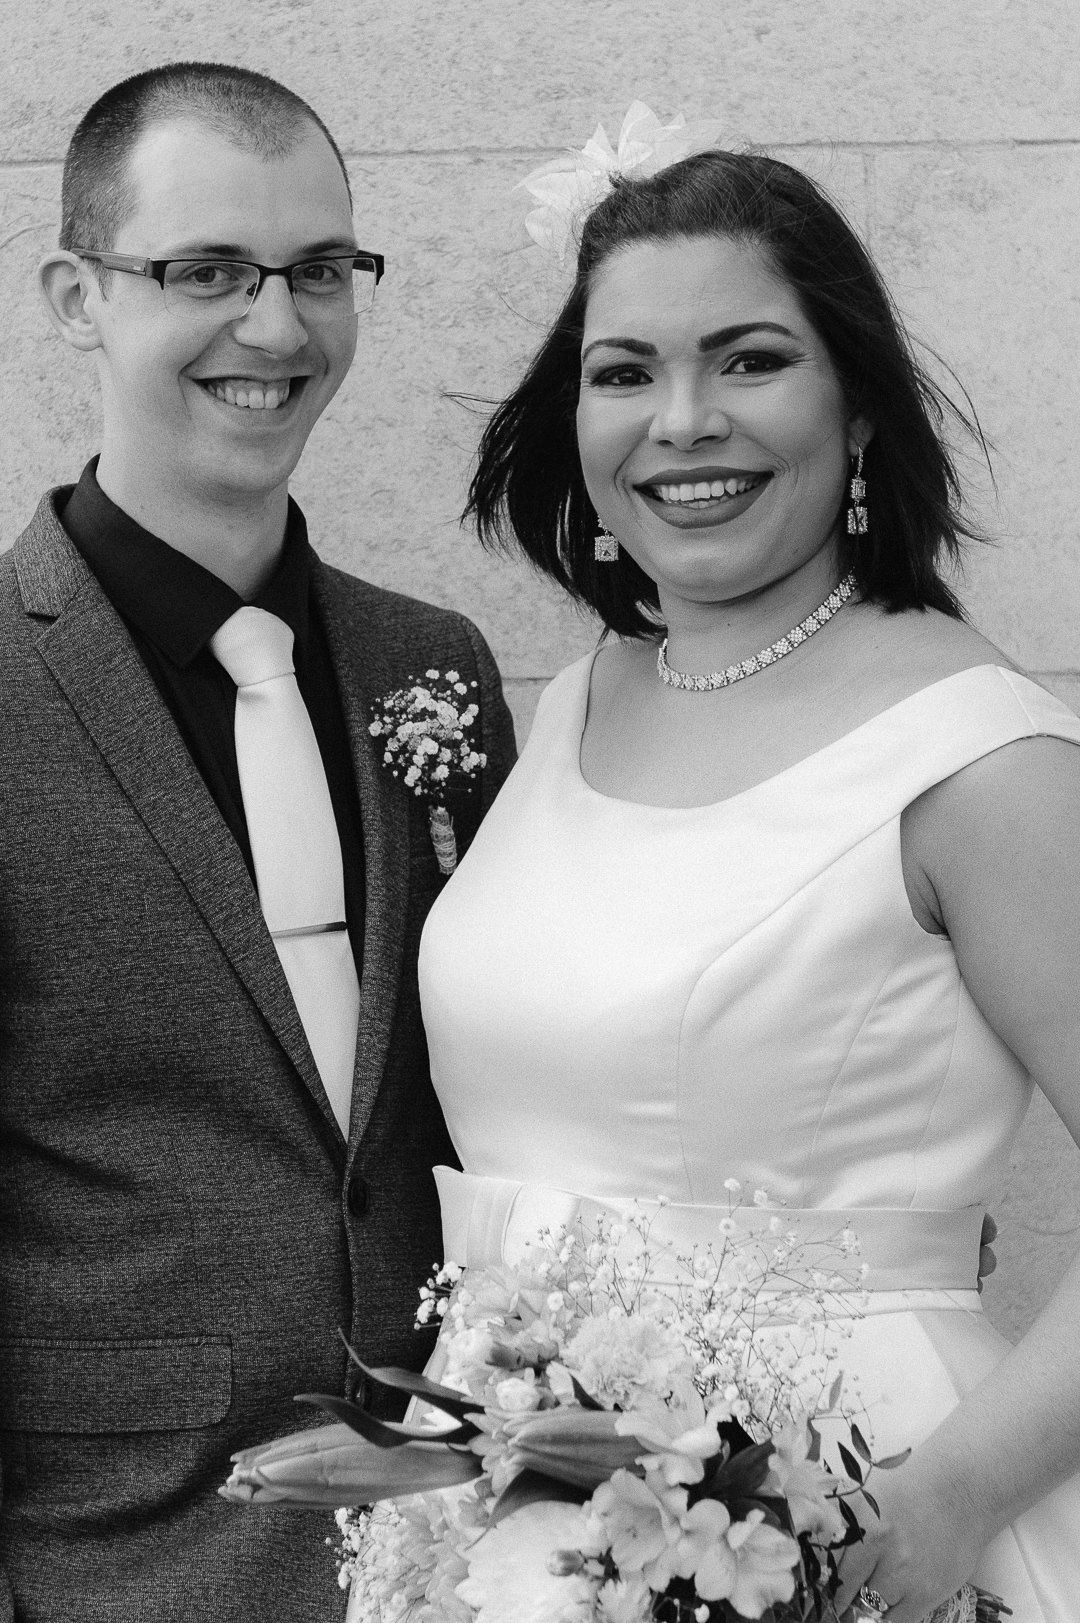 black and white image of the bride and groom smiling at the camera